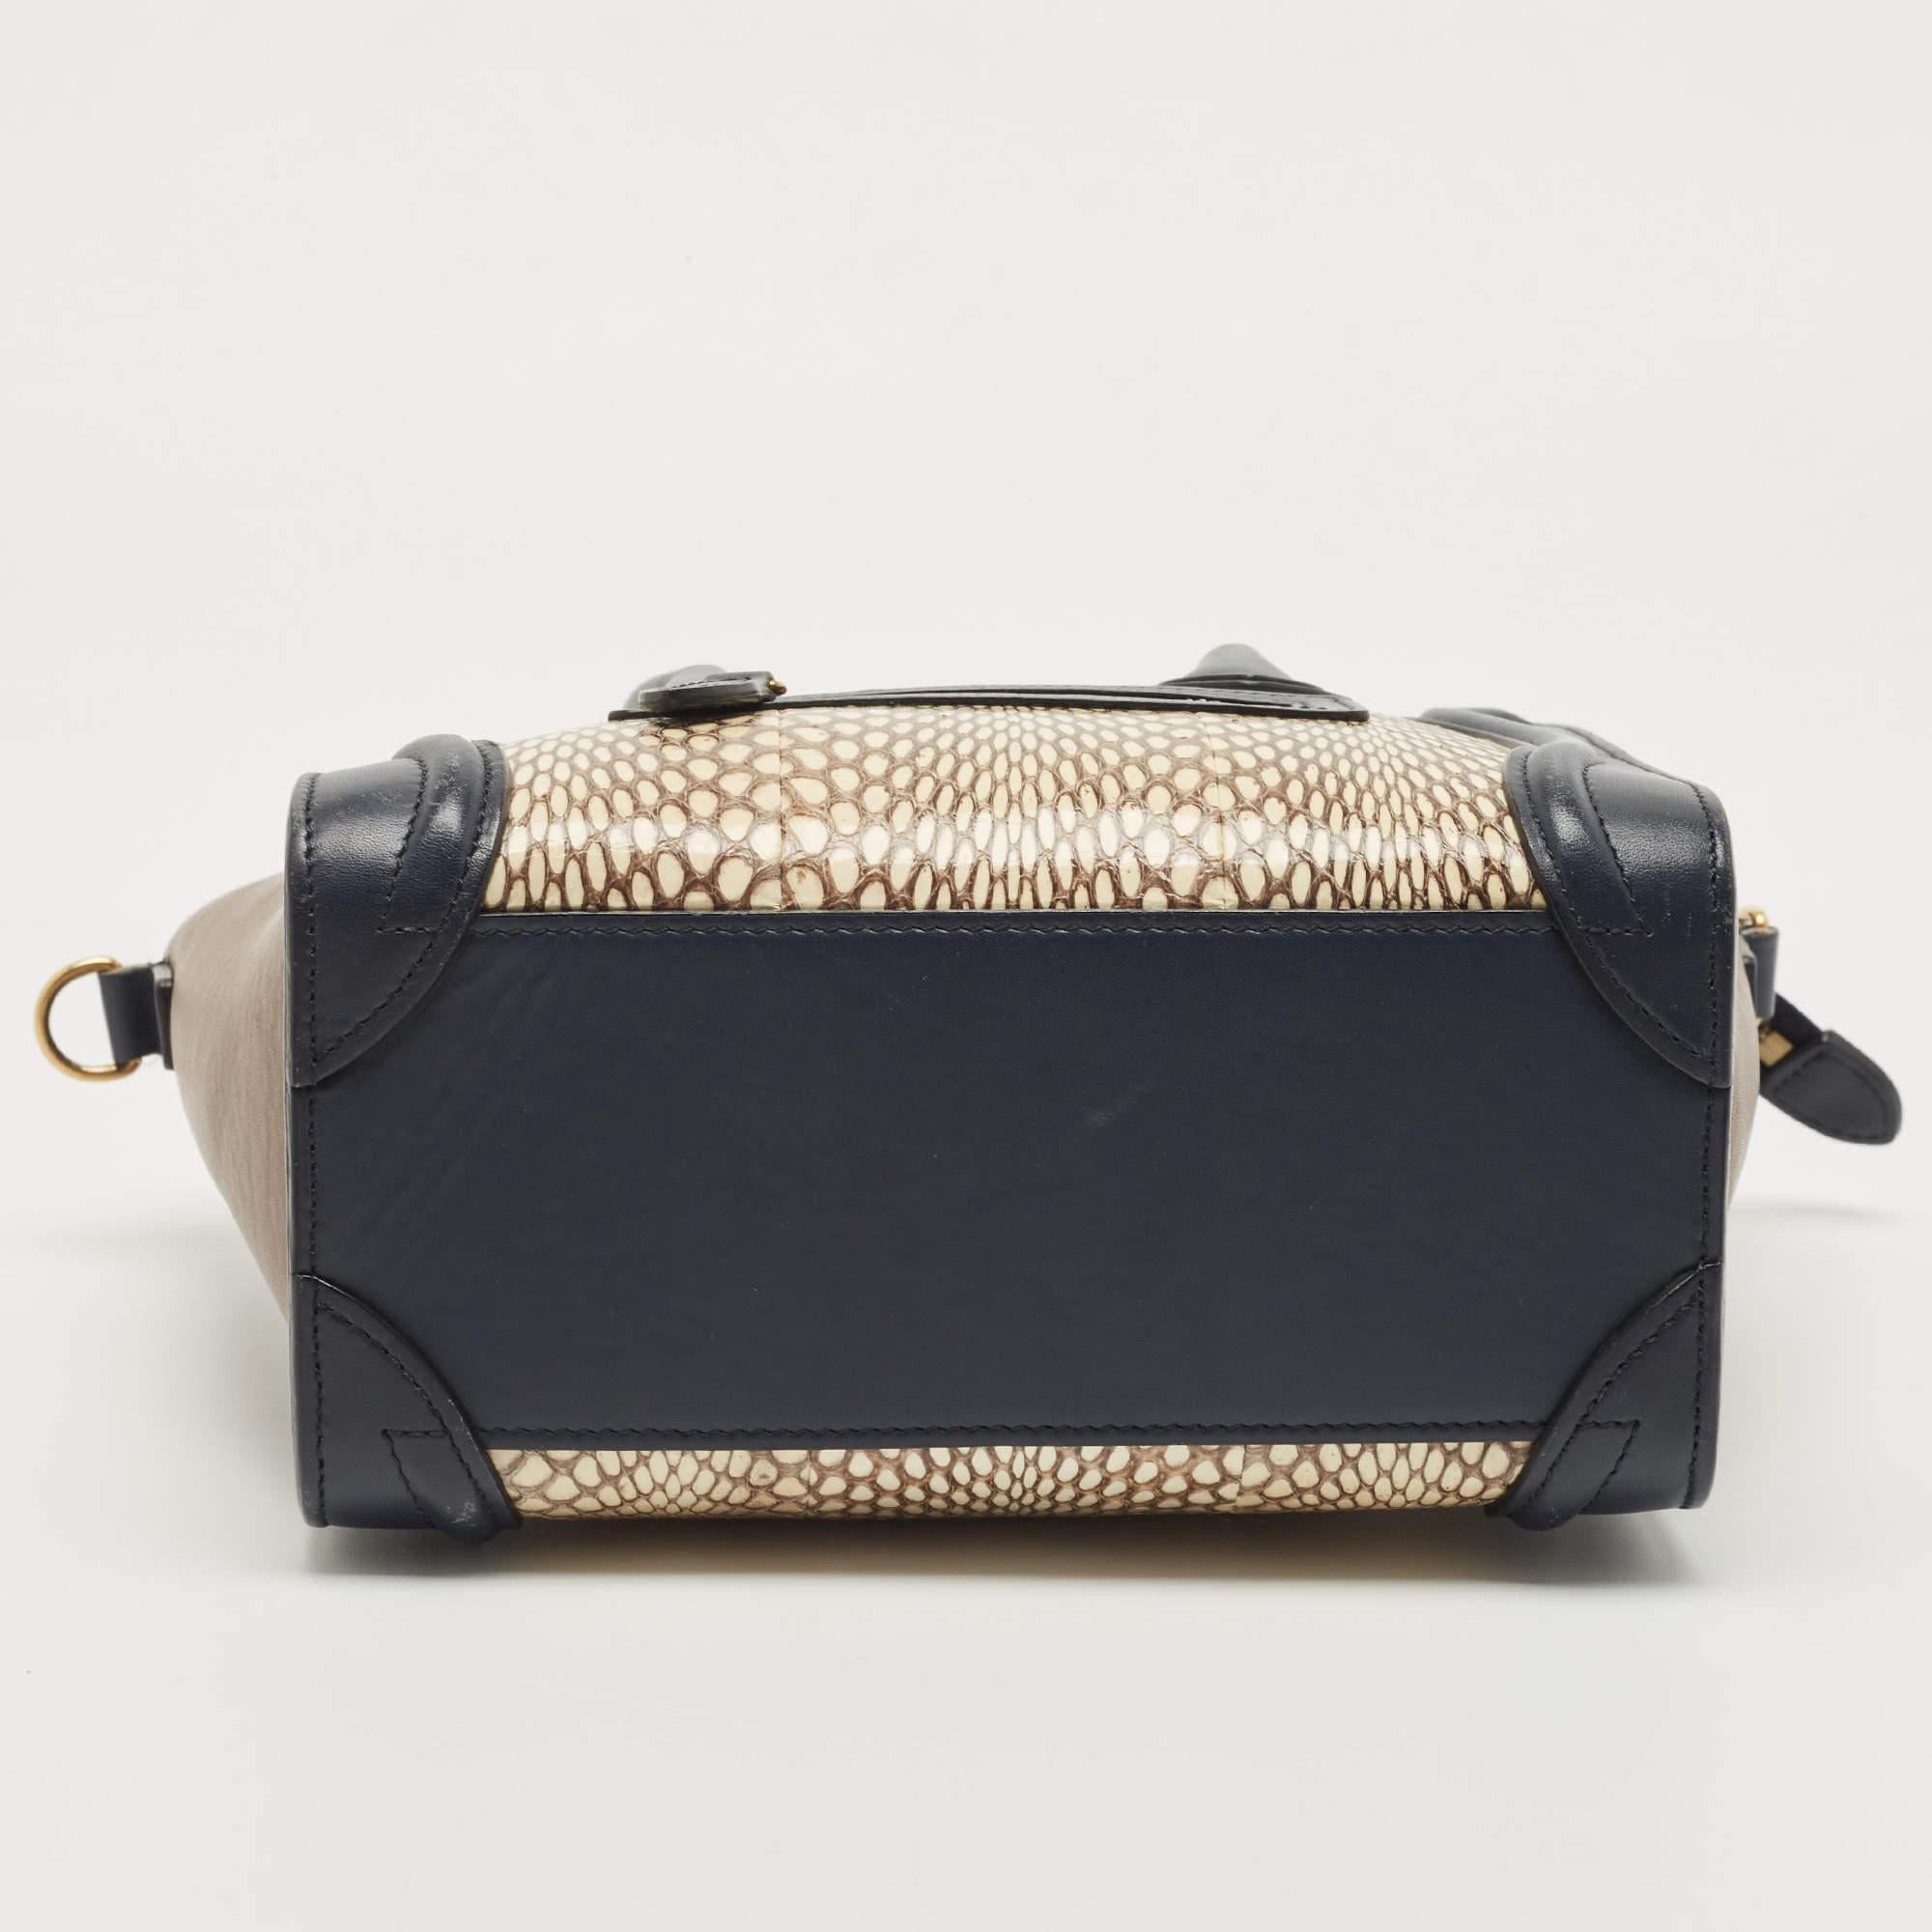 Celine Tricolor Leather and Watersnake Nano Luggage Tote 6